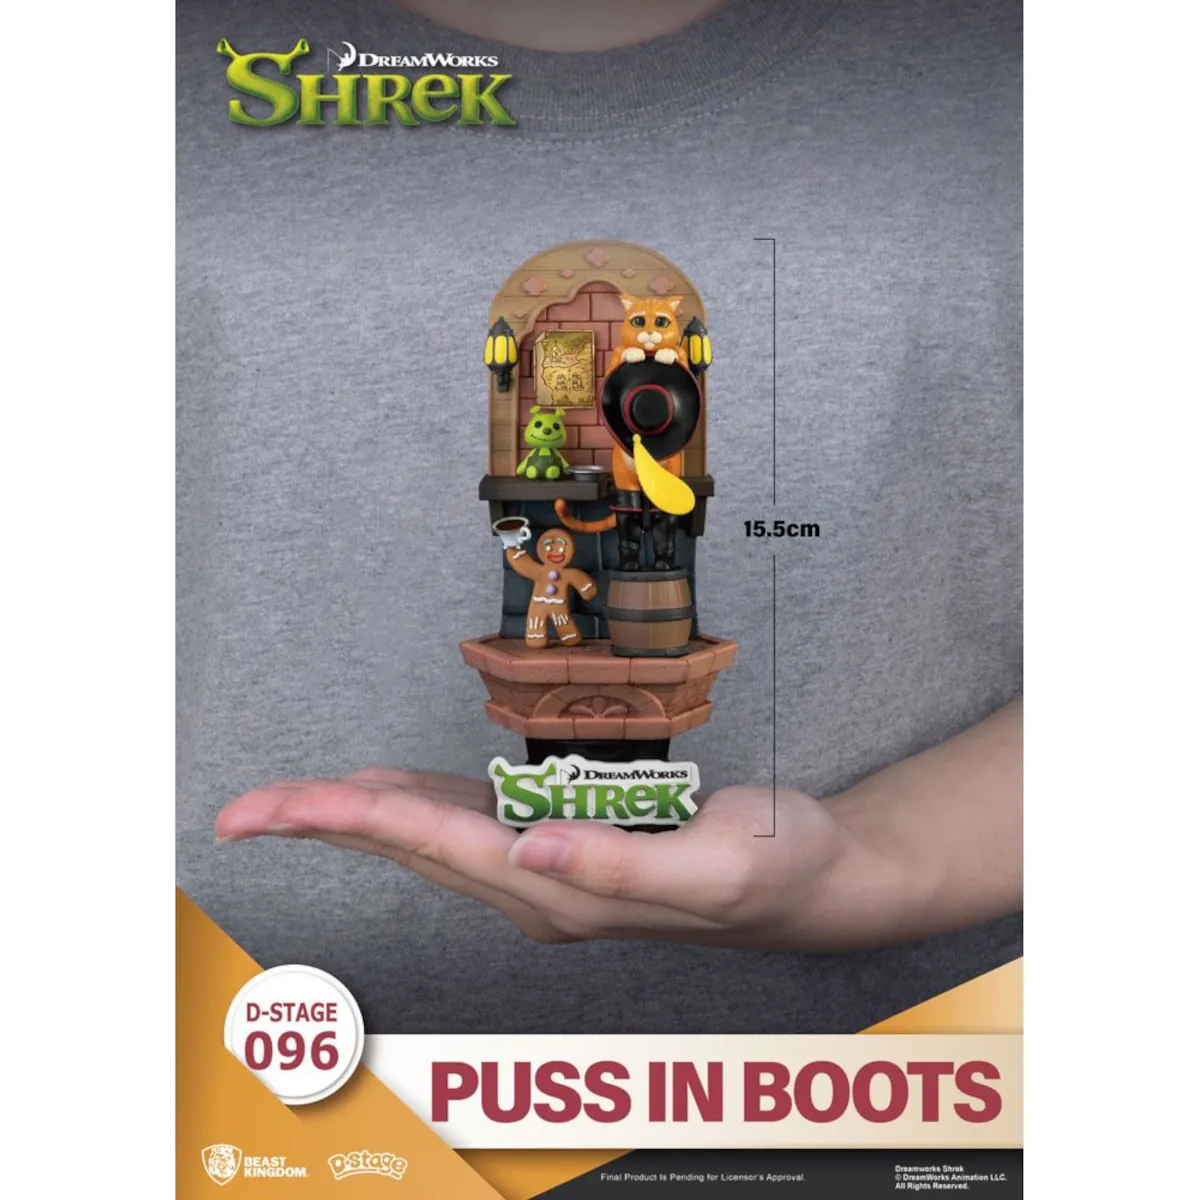 DS-096 DreamWorks Shrek D-Stage 15.5cm Puss in Boots PVC Diorama 5